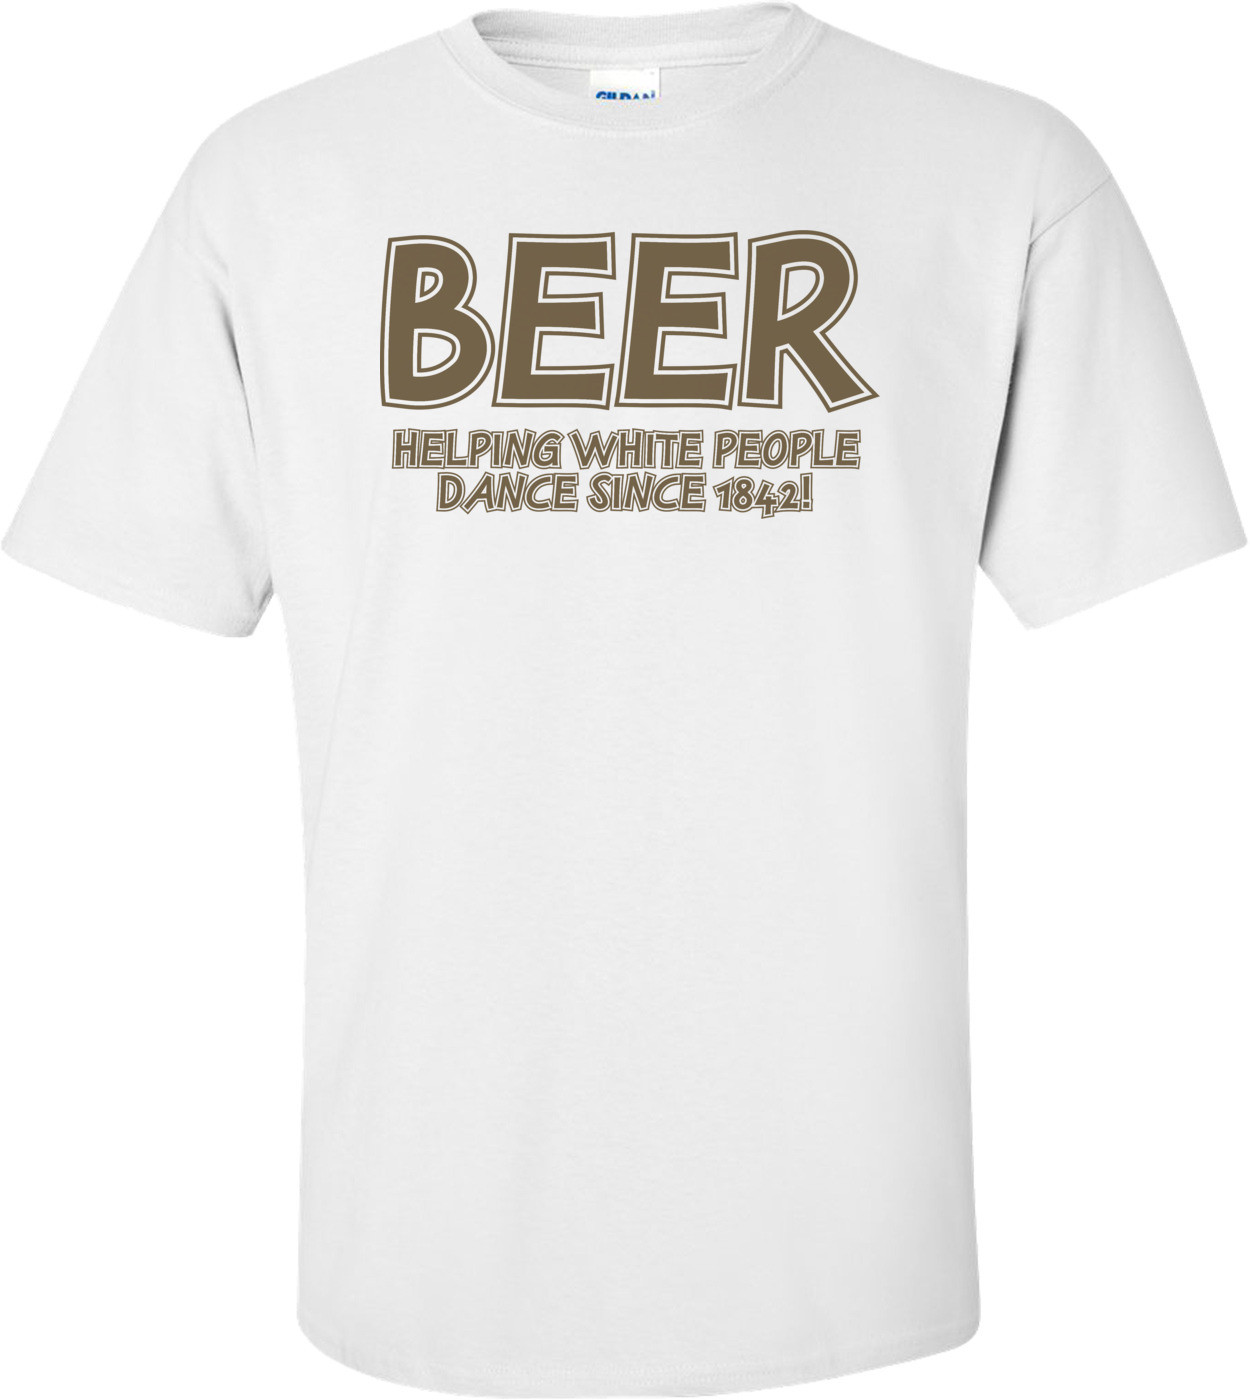 Beer Helping White People Dance T-shirt